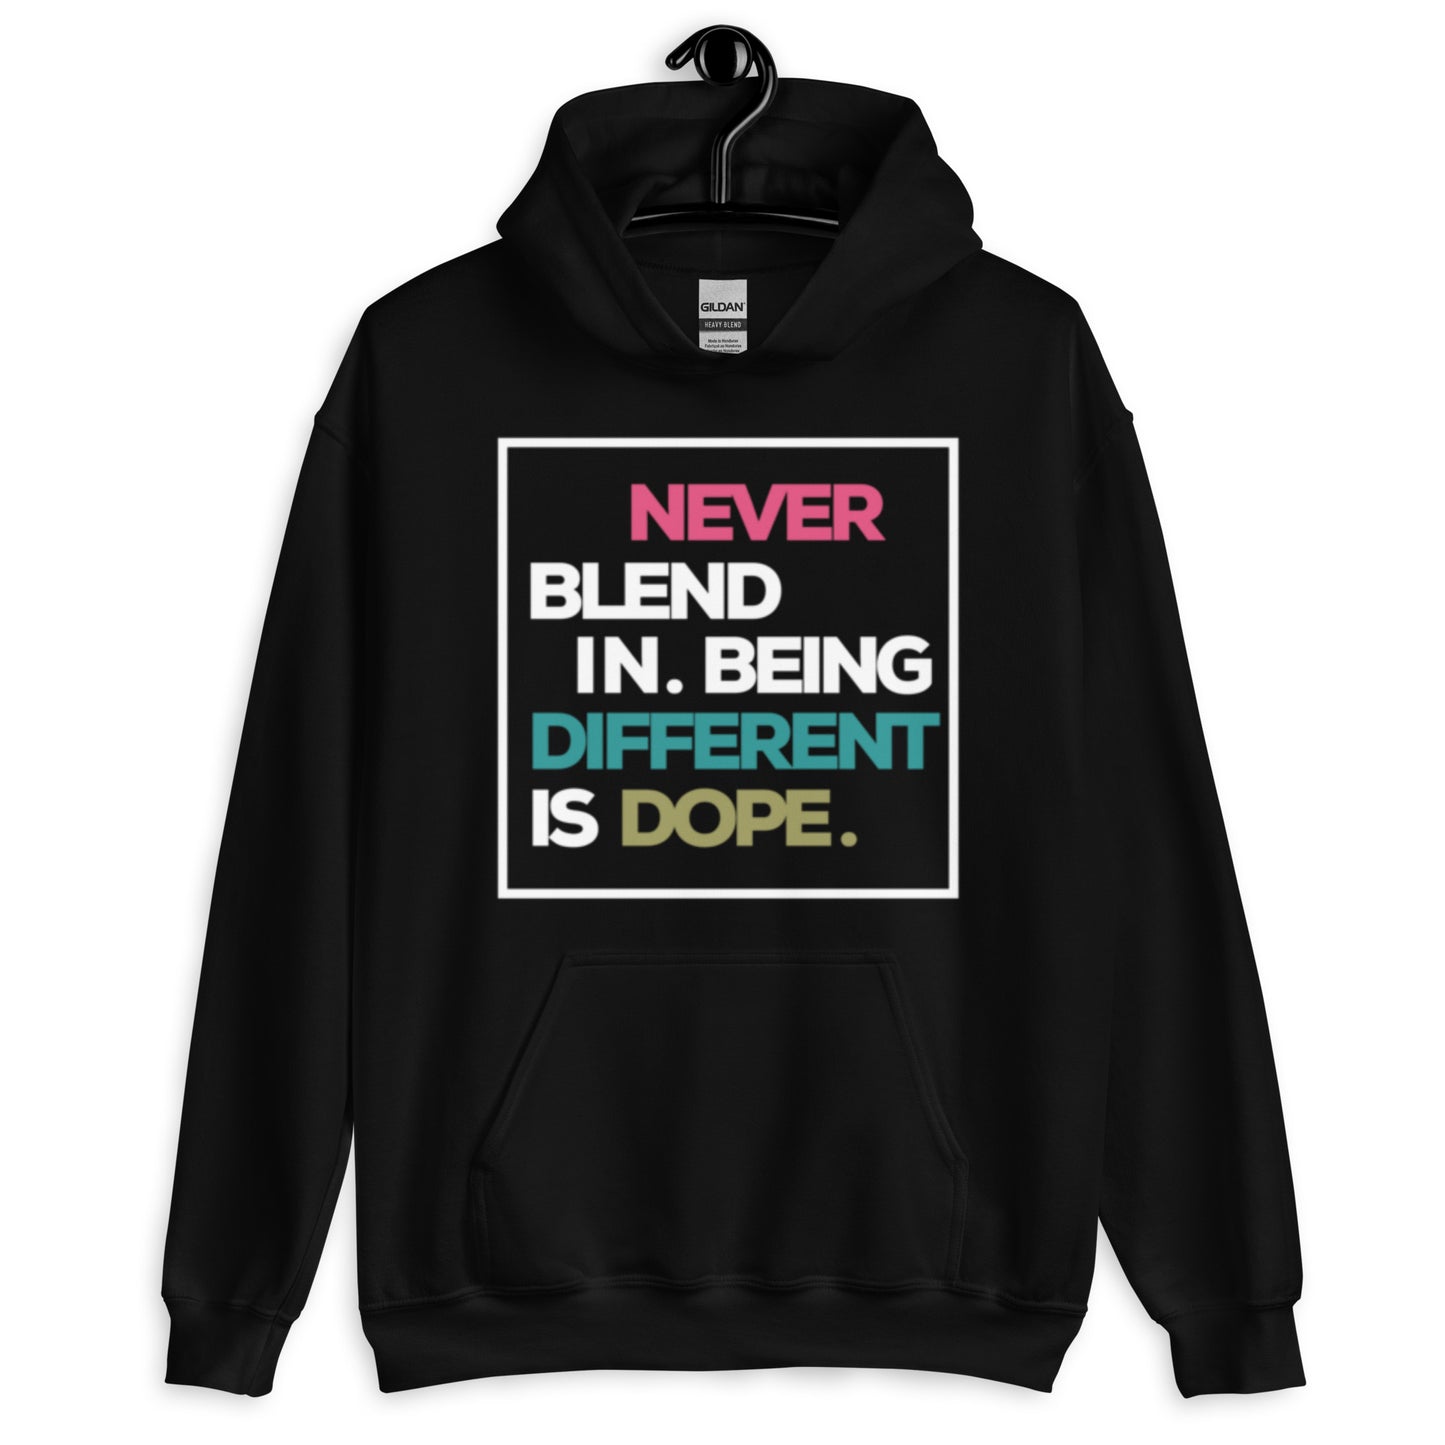 Different is Dope - Unisex Hoodie